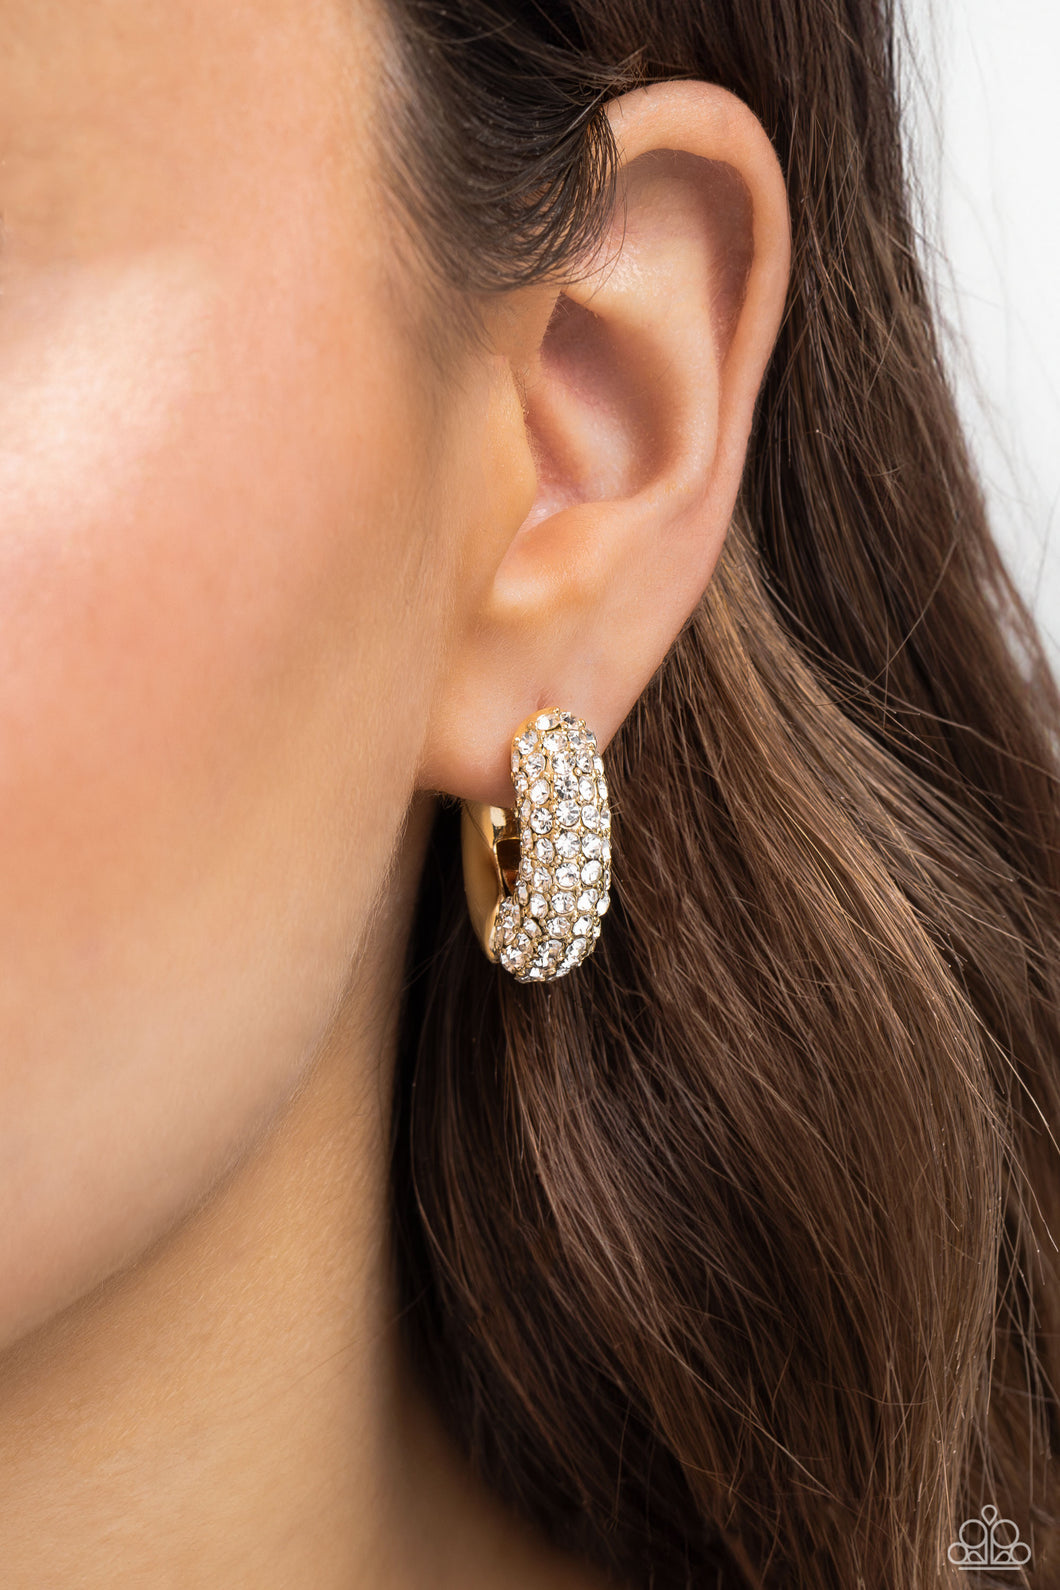 Paparazzi Combustible Confidence - Gold Earrings